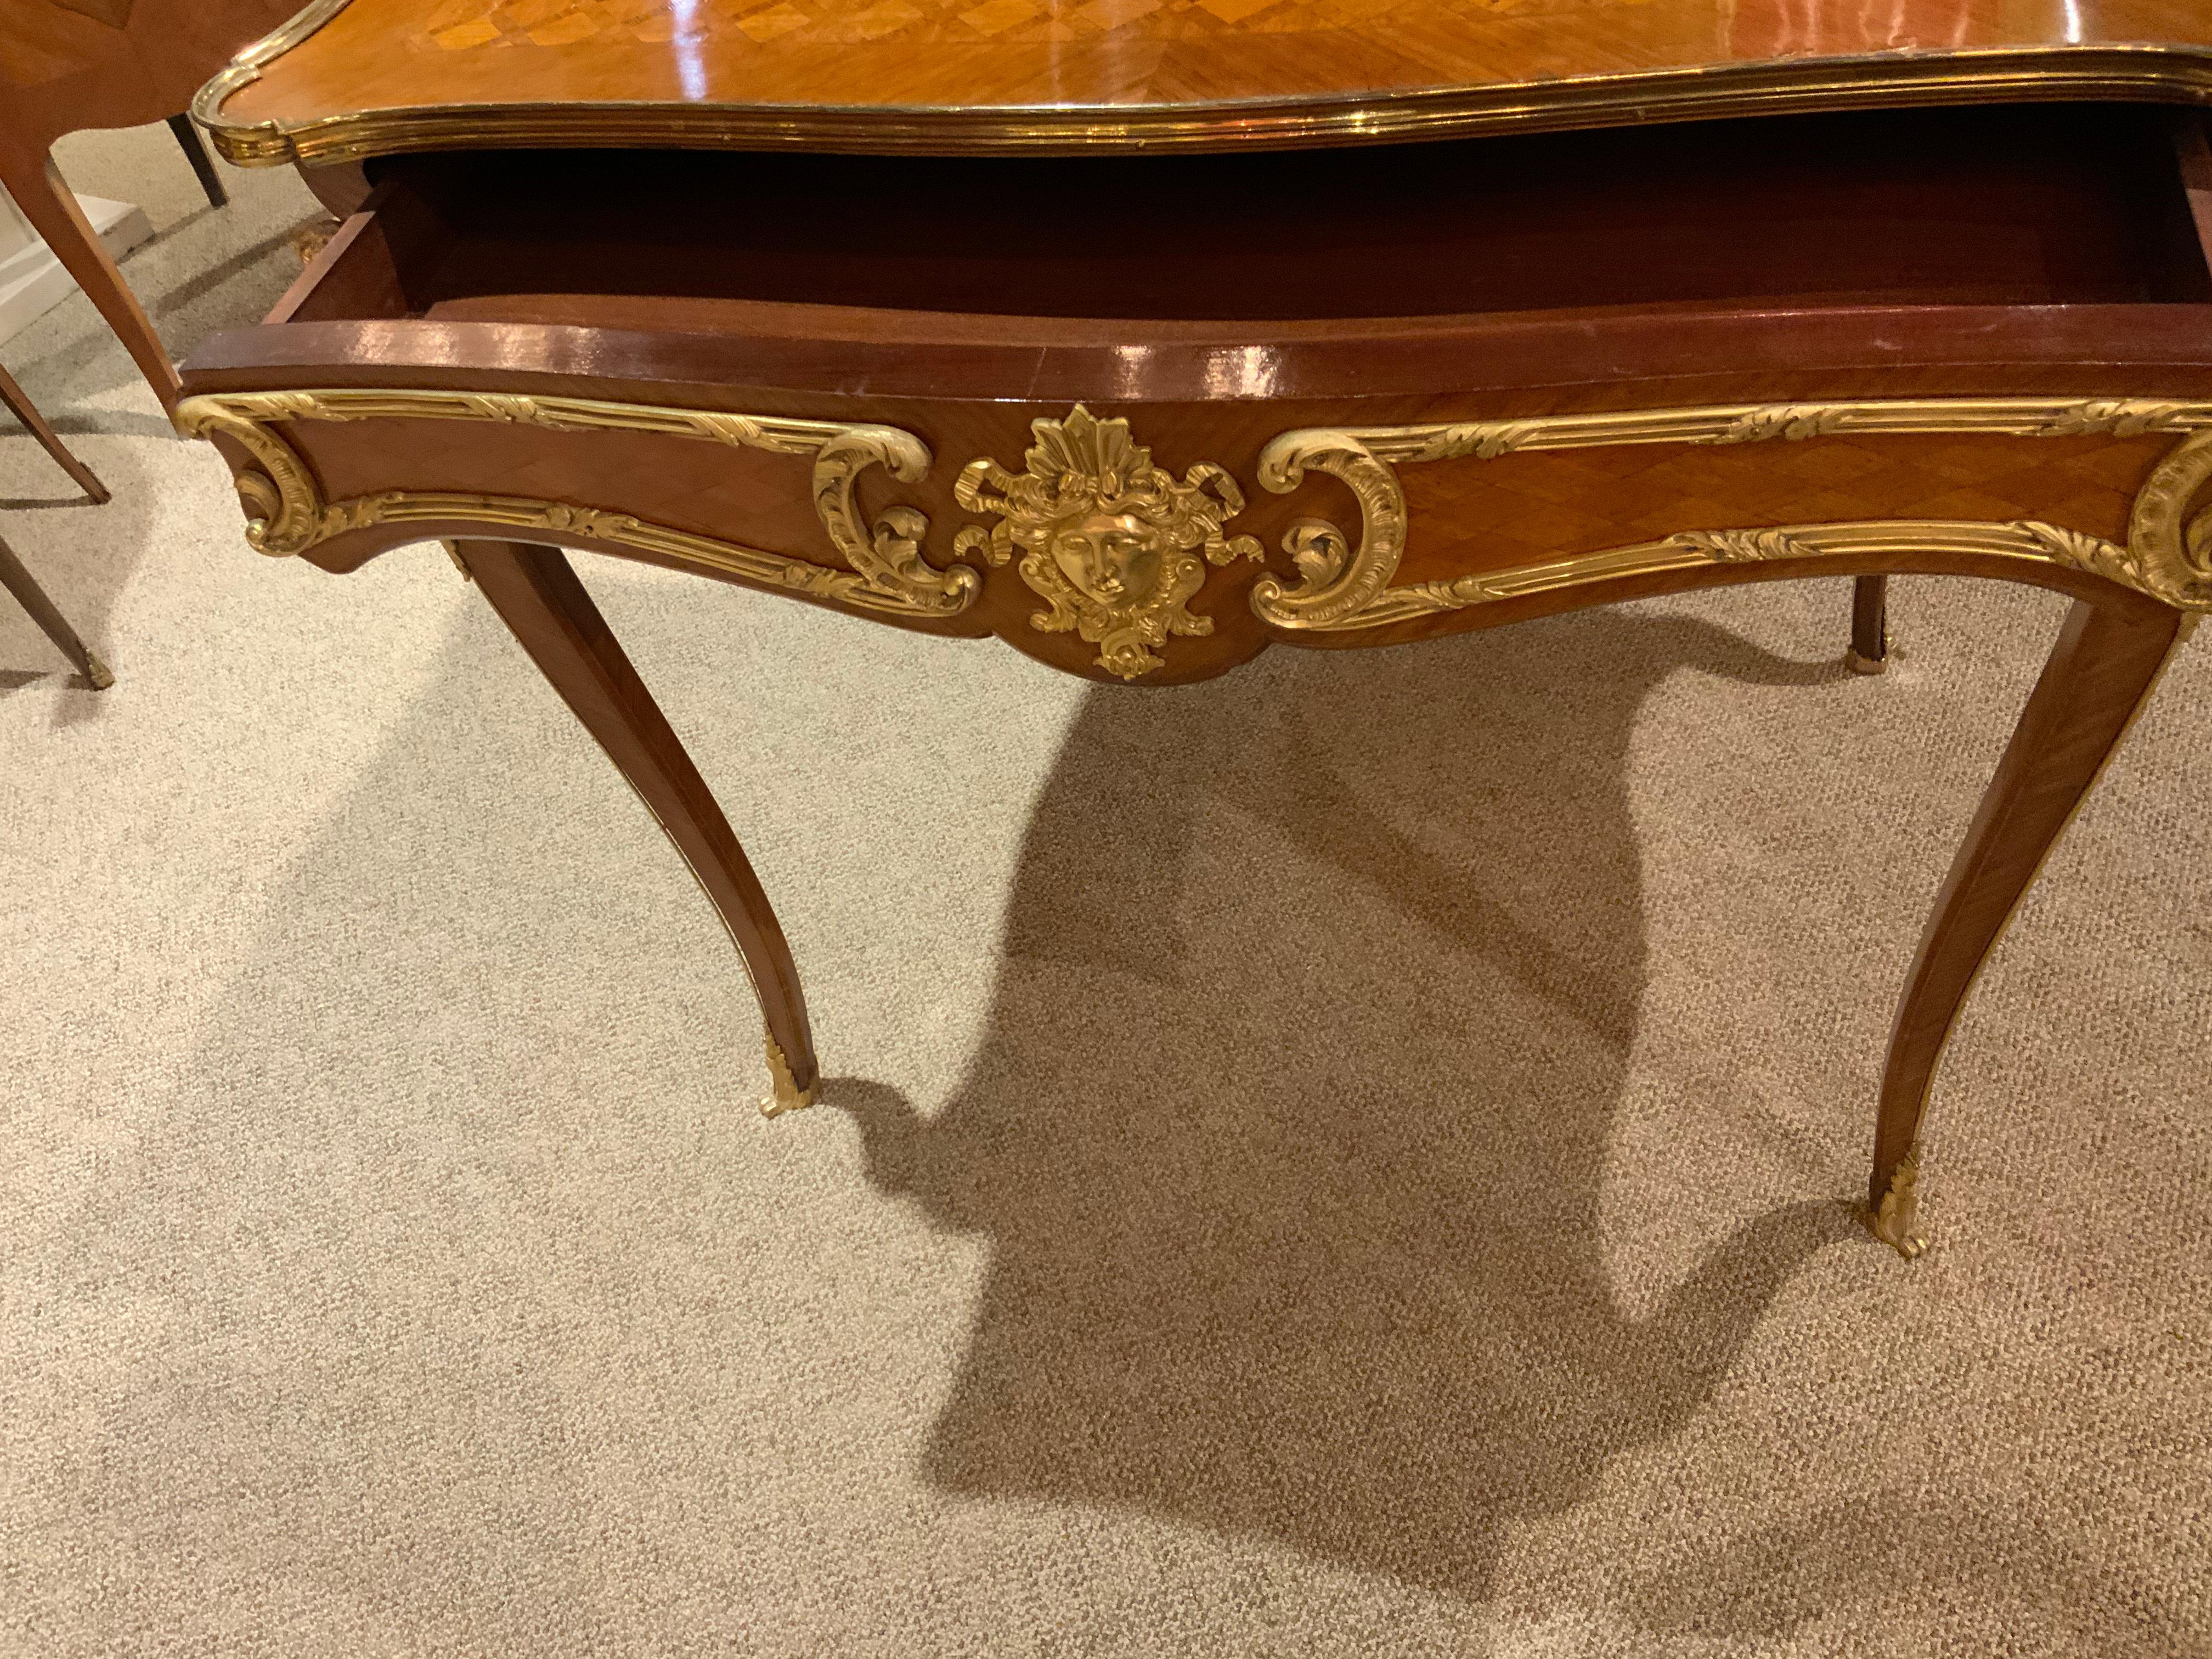 Mahogany Fine French Marquetry Side Table with Gilt Bronze Mounts, Louis XVI-Style For Sale